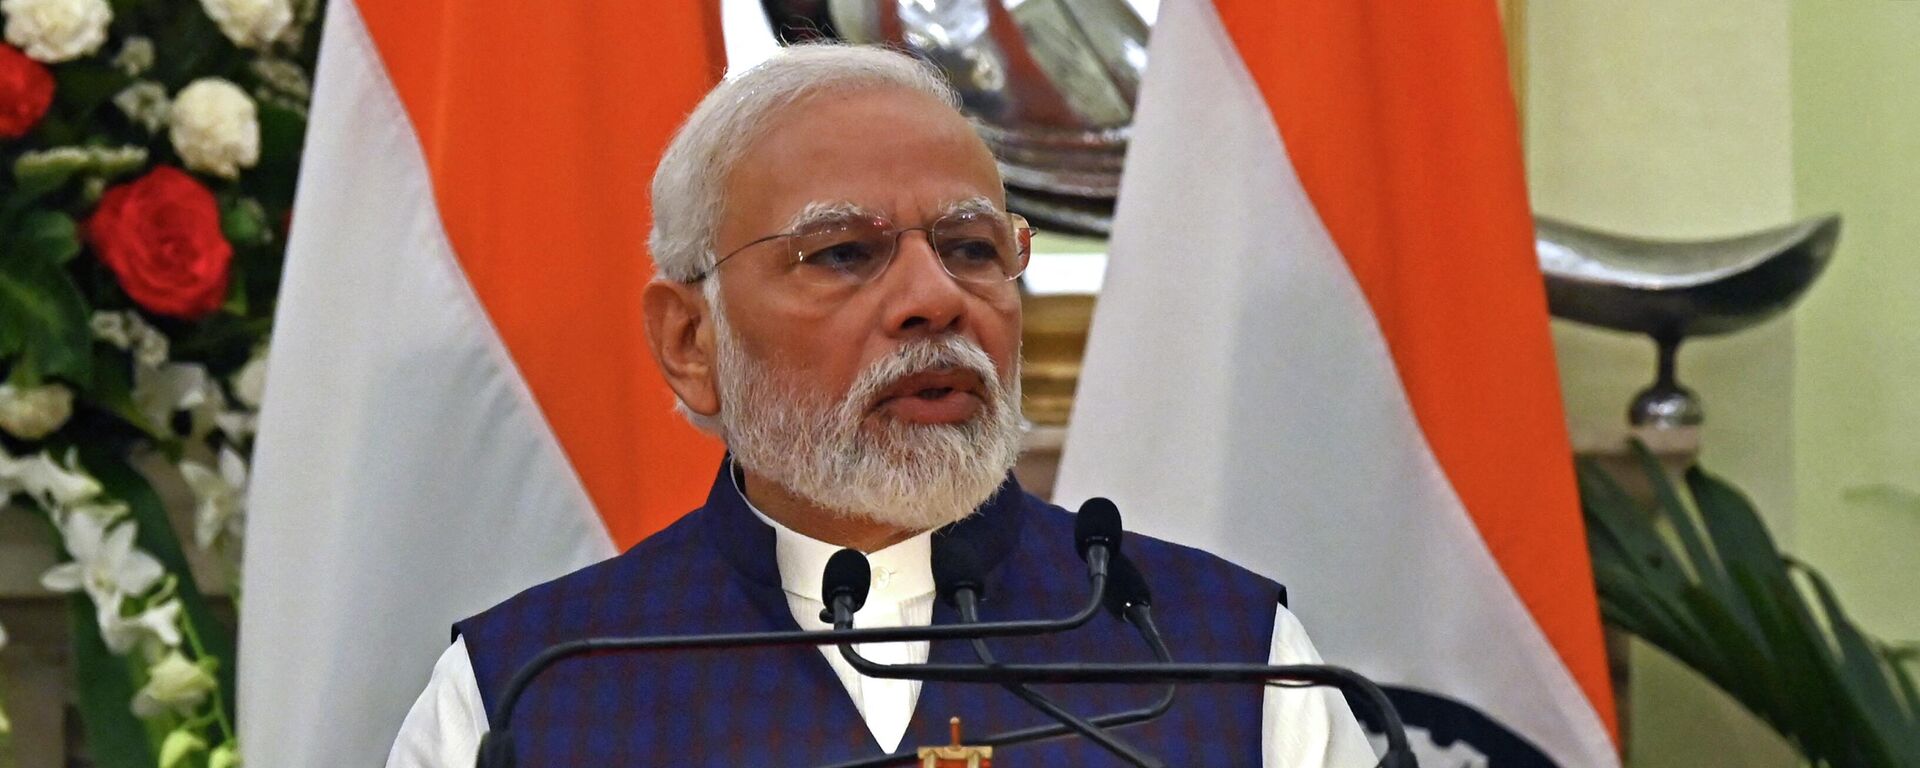 India's Prime Minister Narendra Modi speaks during a joint press briefing with his Nepal's counterpart Sher Bahadur Deuba (not pictured) after the exchange of agreements ceremony at the Hyderabad House in New Delhi on April 2, 2022. - Sputnik International, 1920, 13.04.2022